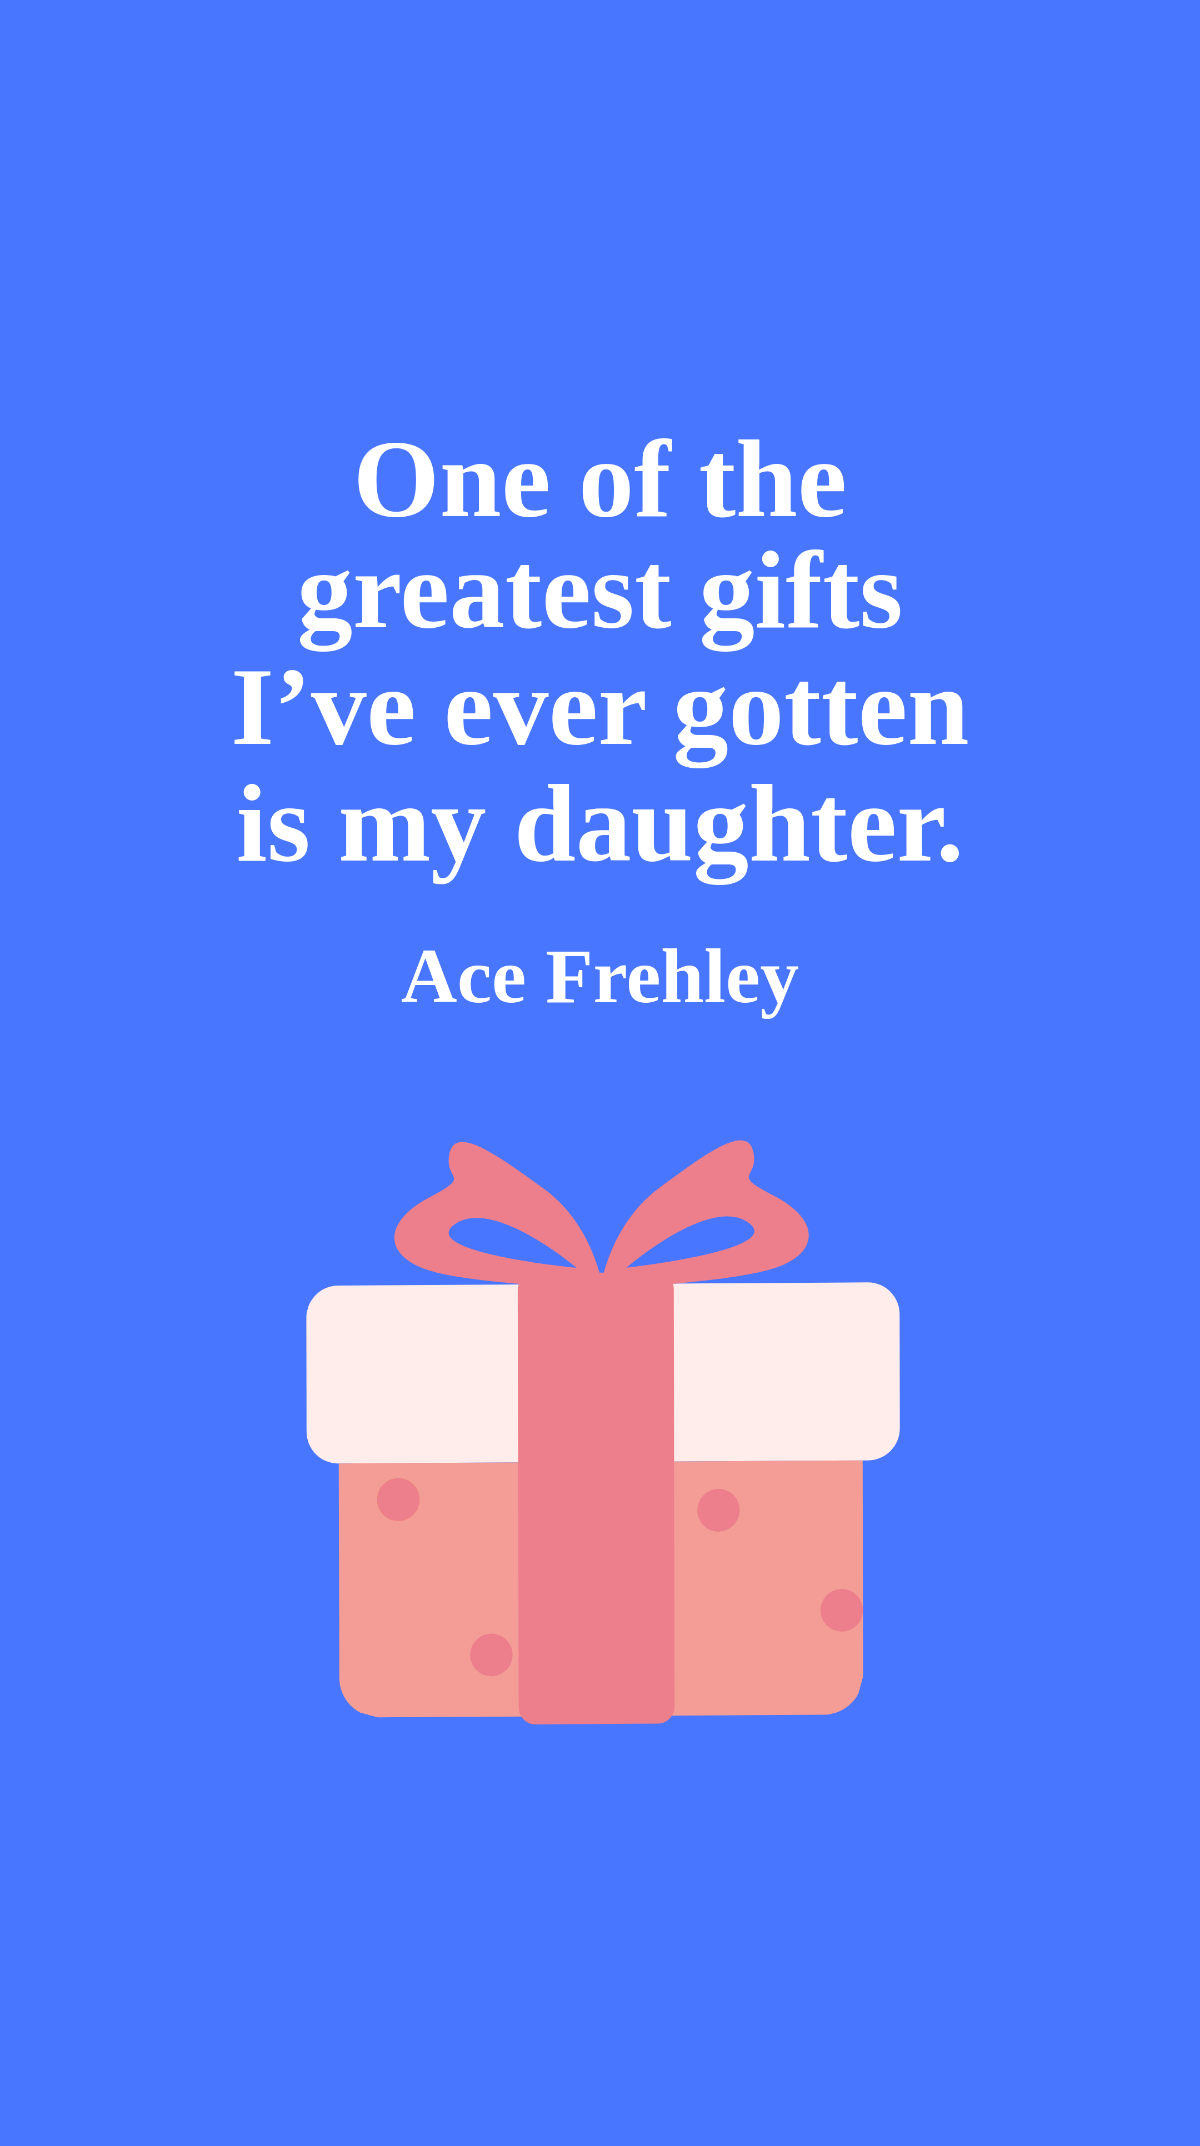 Ace Frehley - One of the greatest gifts I’ve ever gotten is my daughter.